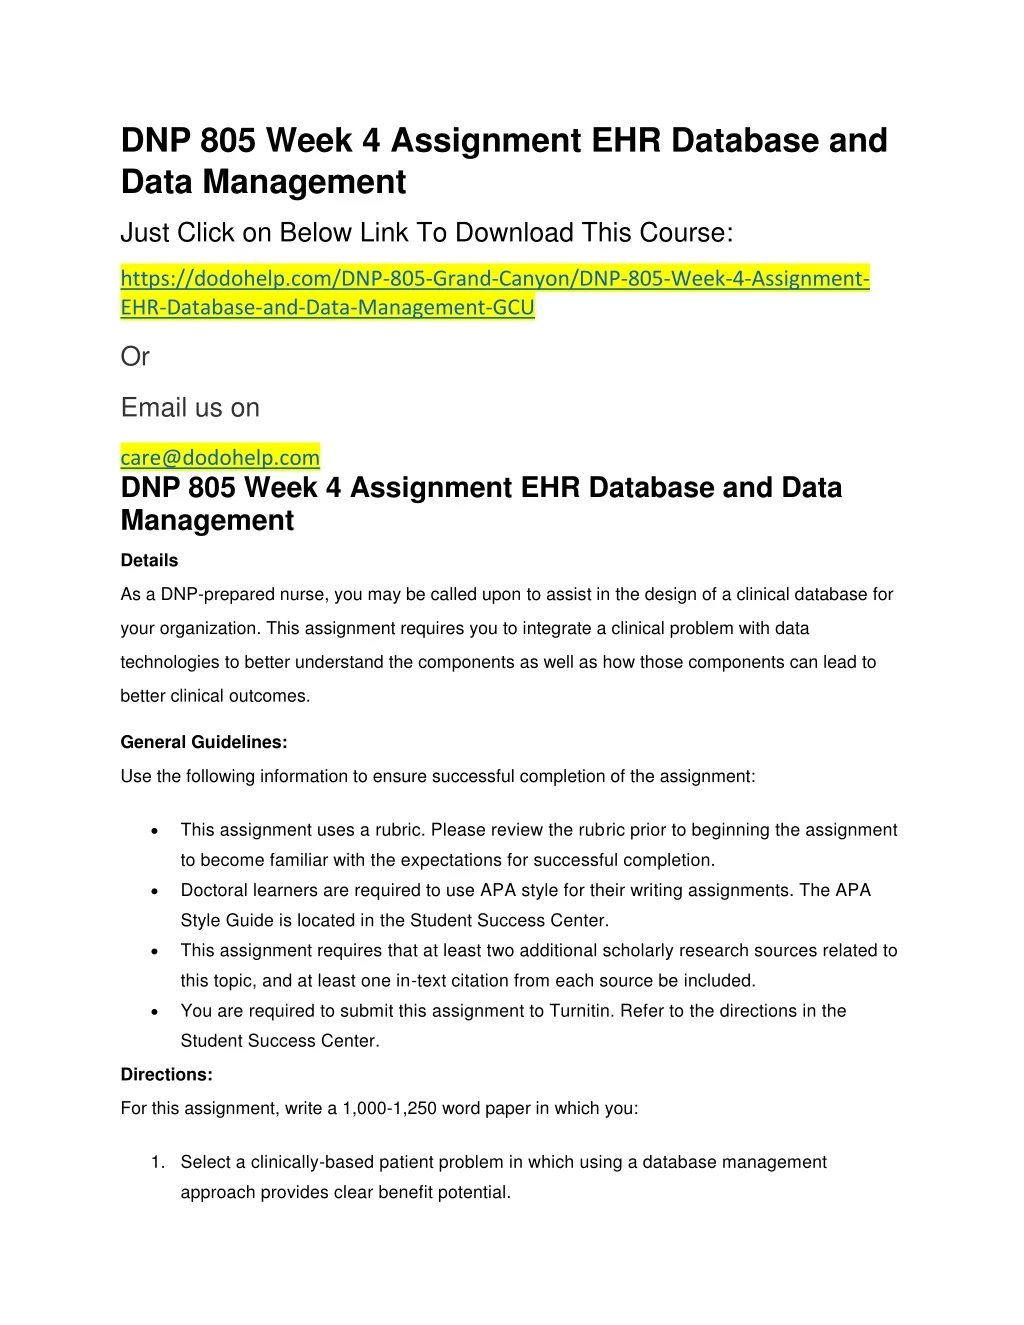 dnp 805 week 4 assignment ehr database and data